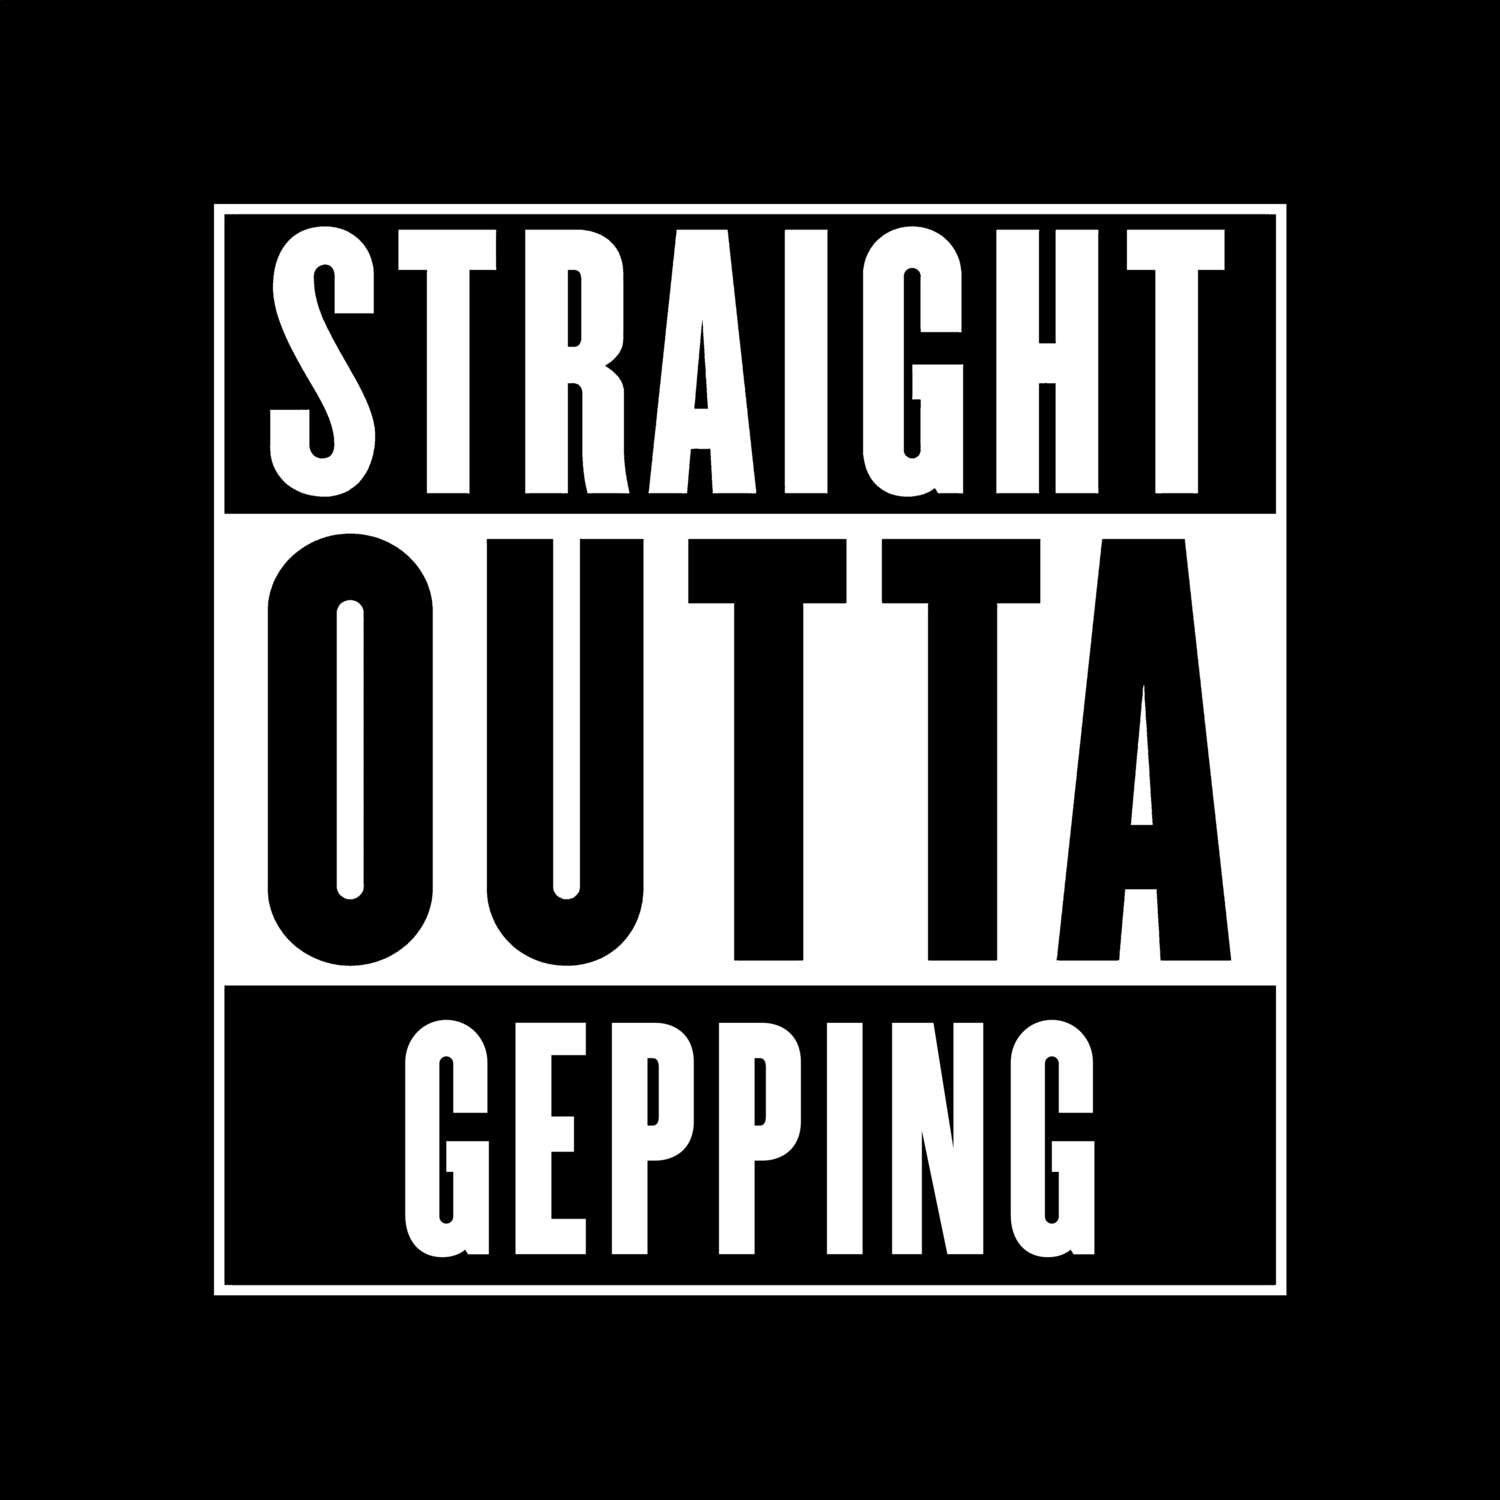 Gepping T-Shirt »Straight Outta«